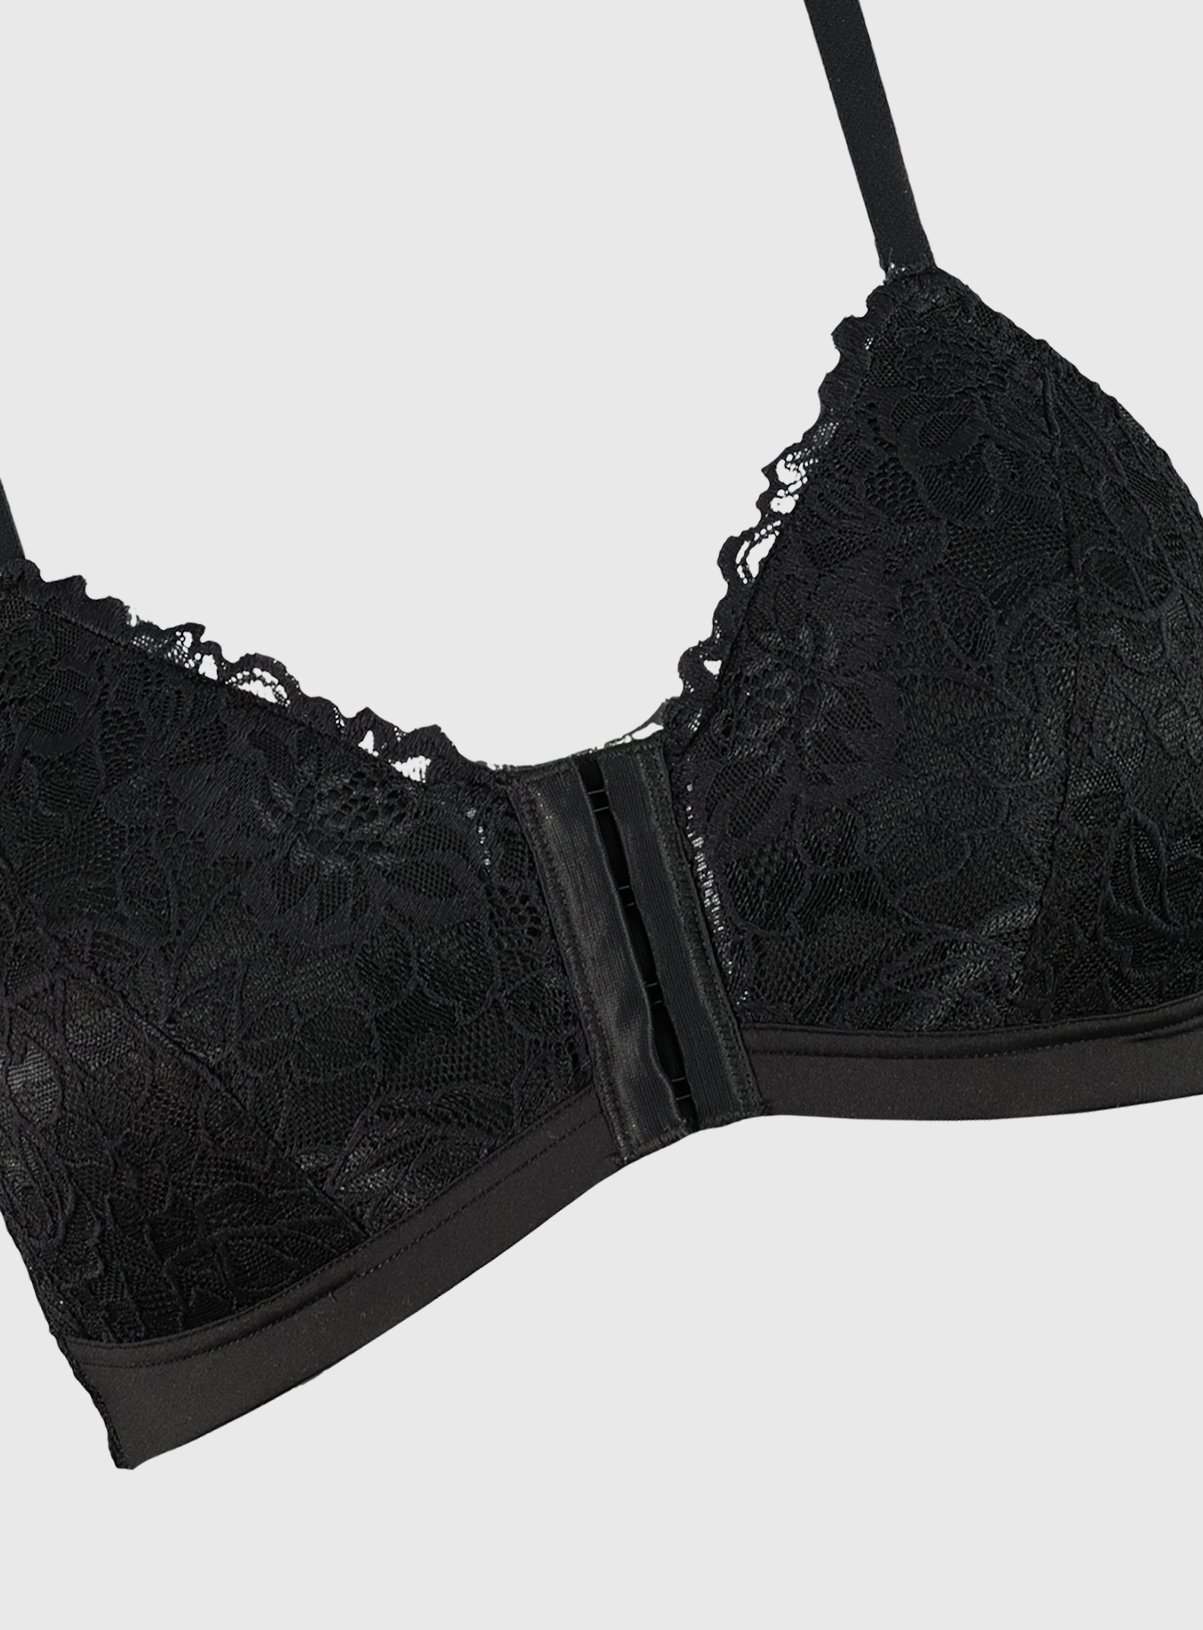 Black Lace Front Fastening Padded Bra Review